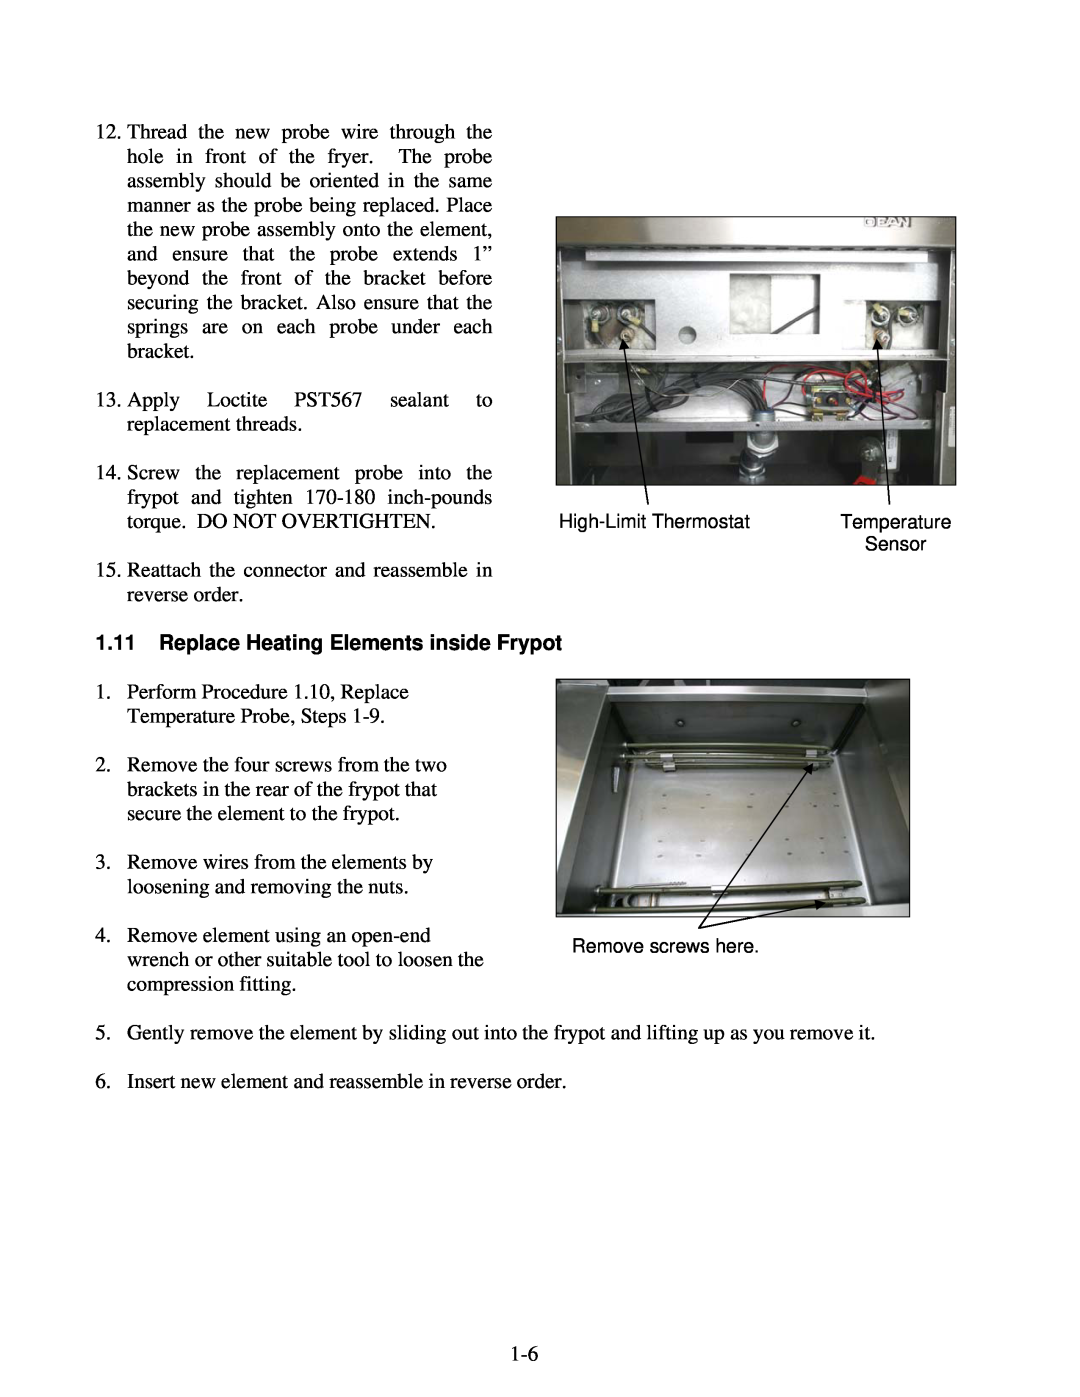 Frymaster 1824E manual 1.11Replace Heating Elements inside Frypot 